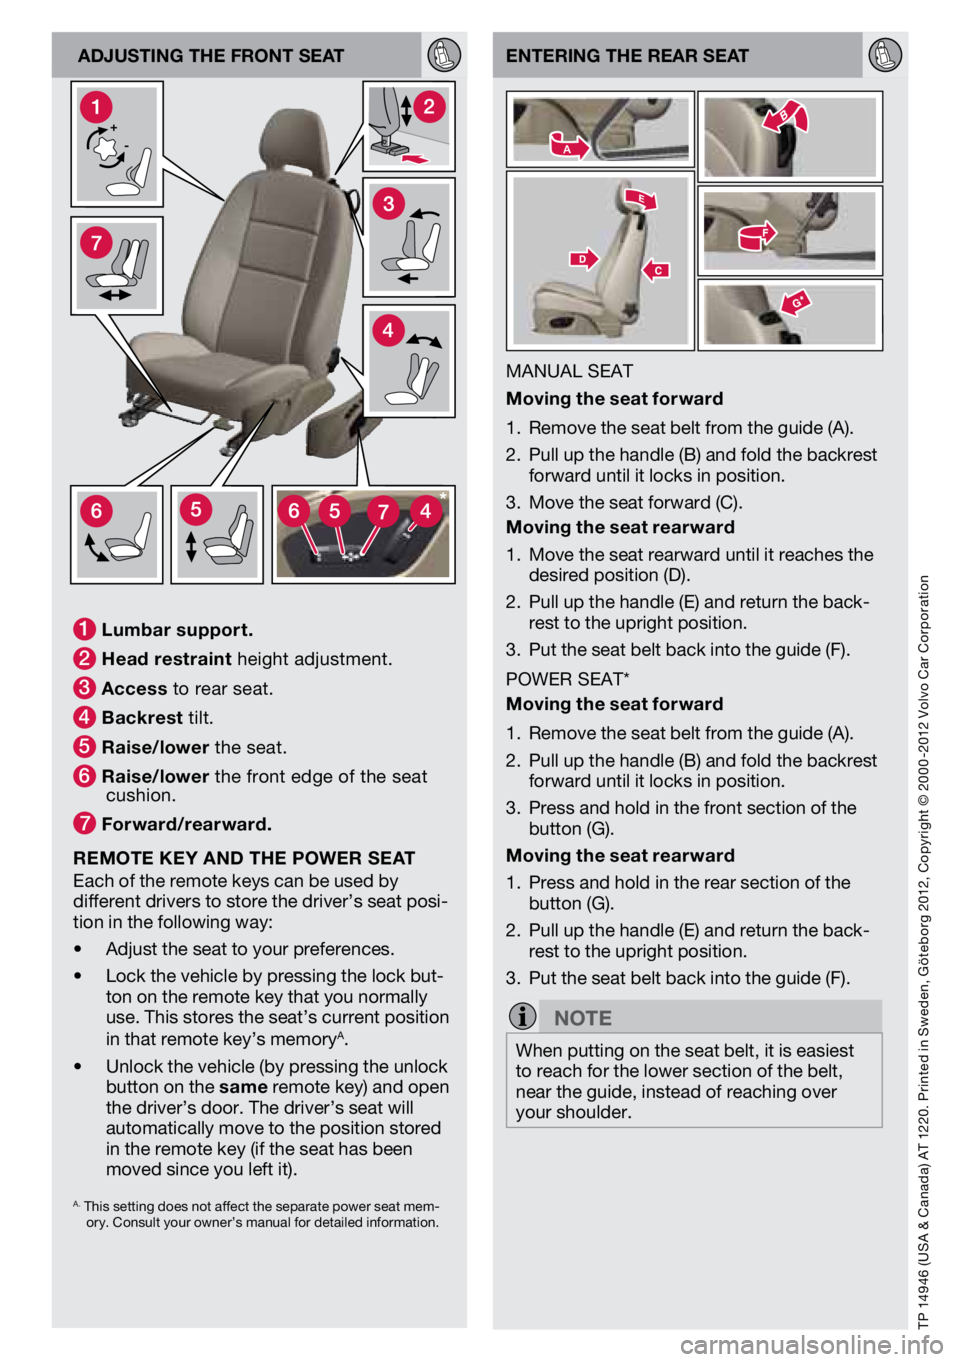 VOLVO C30 2013  Quick Guide TP 14946 (Usa & Canada) a T 1220. Printed in s weden, göteborg 2012, Copyright © 2000-2012 v olvo Car Corporation
enterIng the rear seat
MaNUal seaT
moving the seat forward
1.  remove the seat belt 